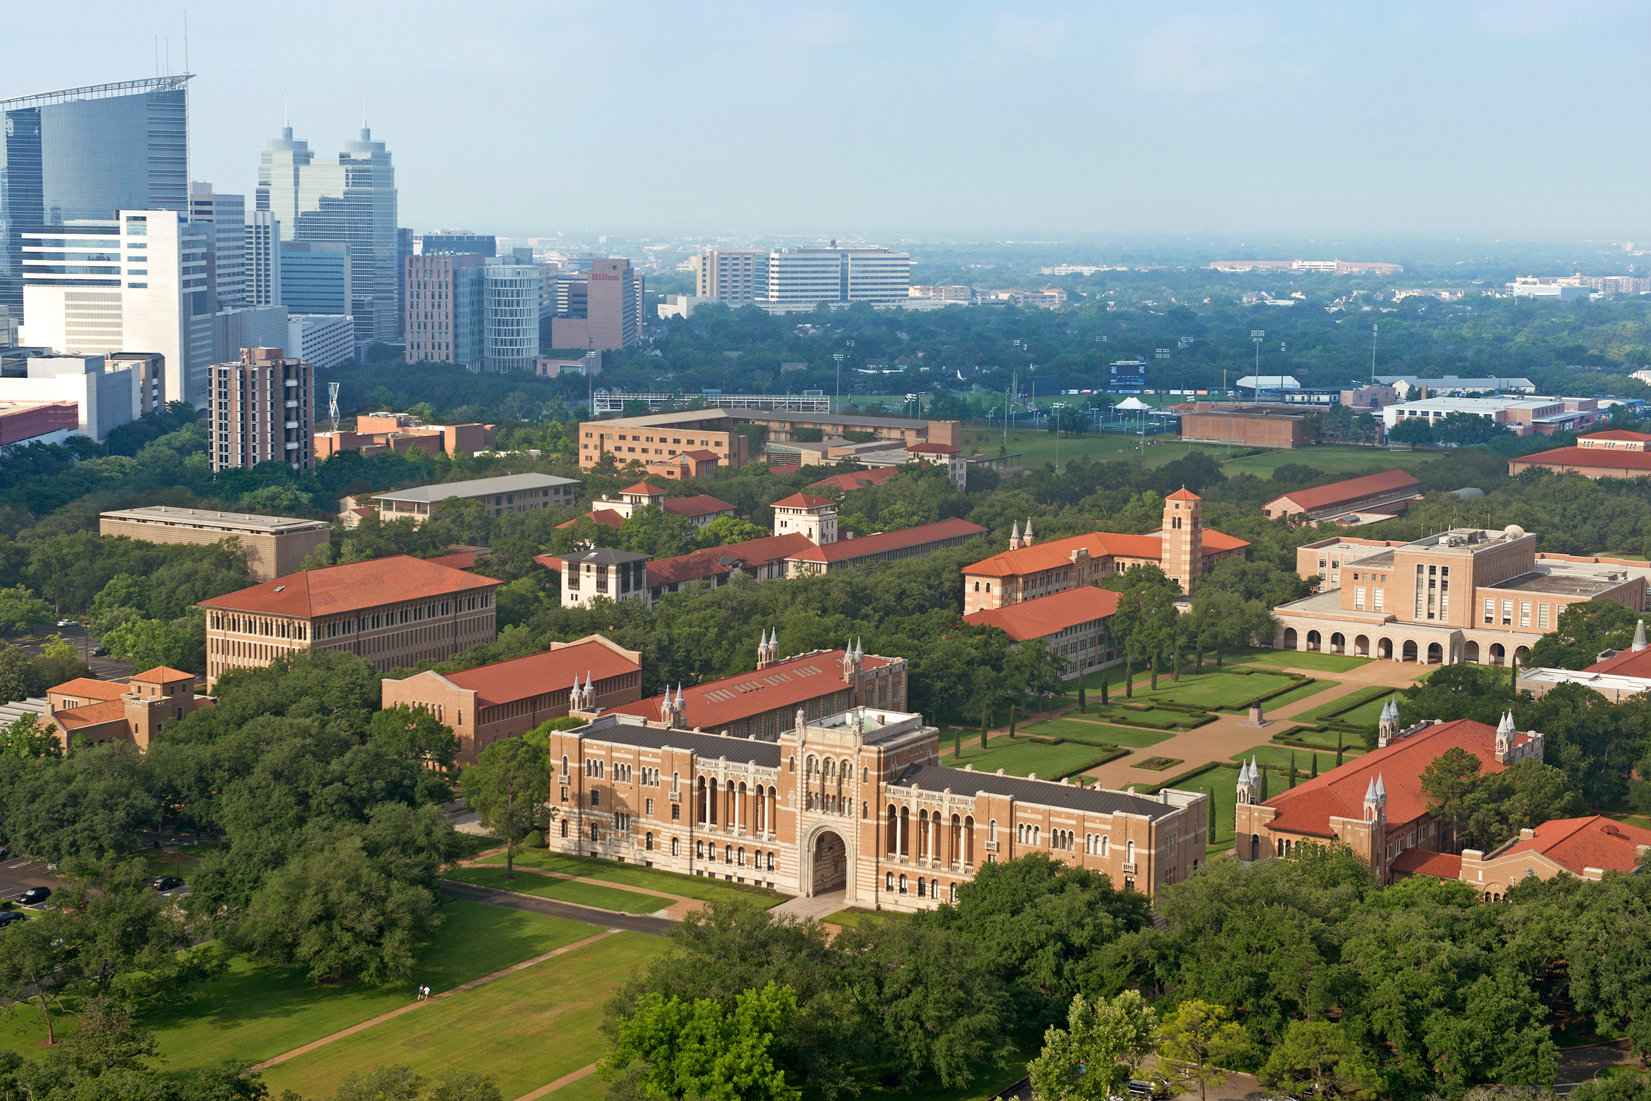 Aerial view of the Rice University Campus